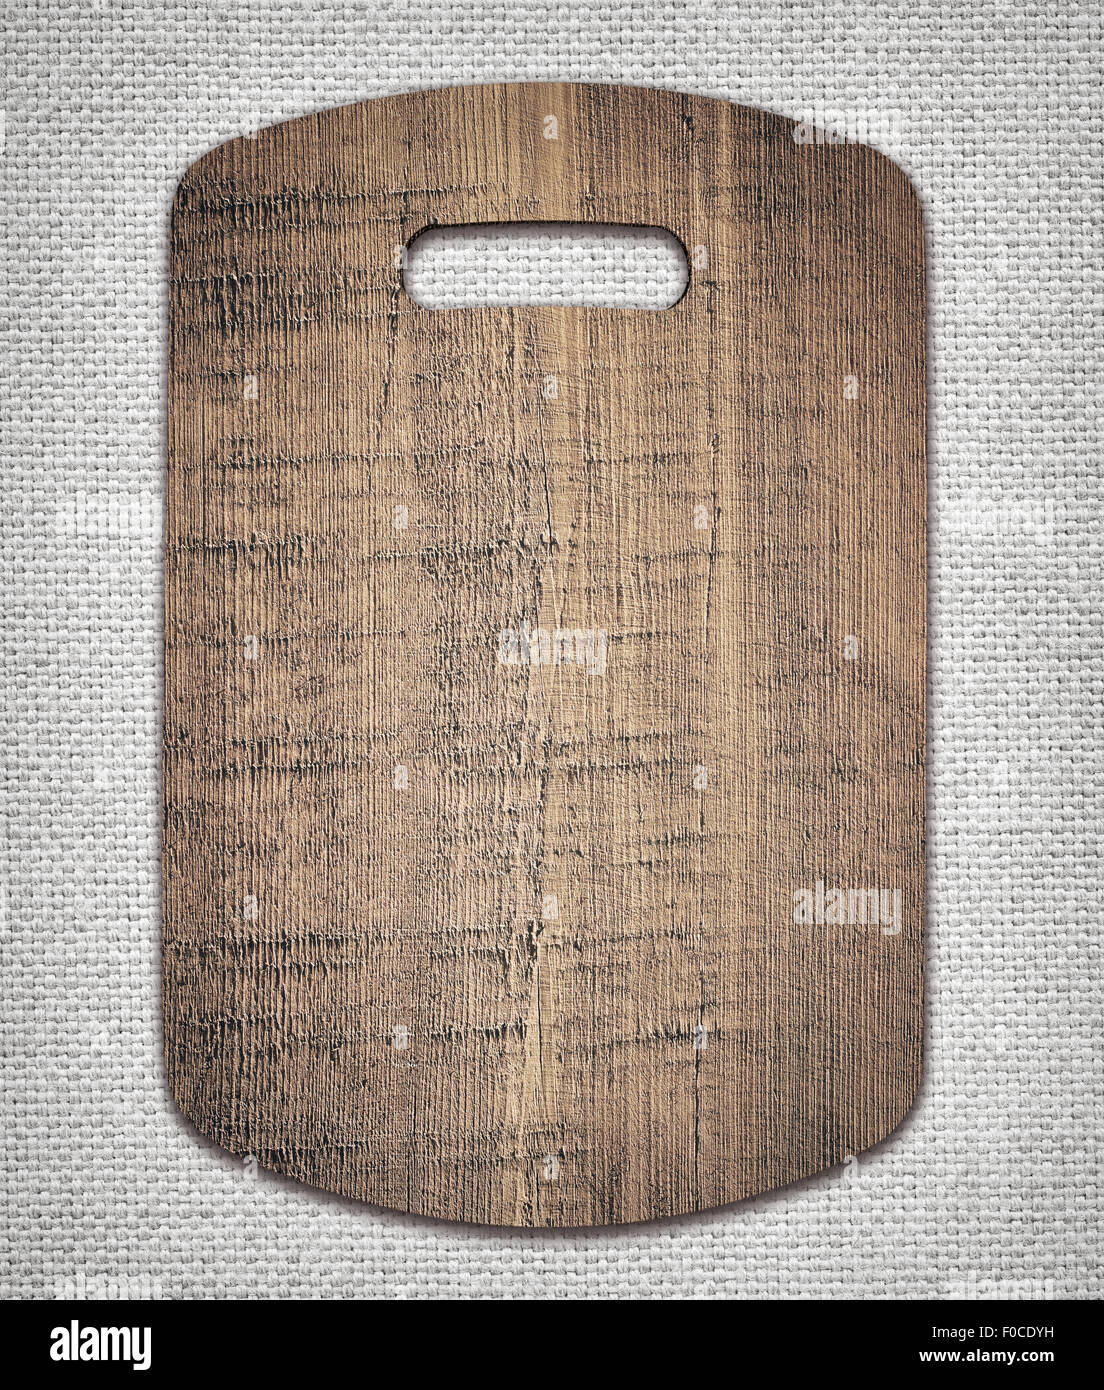 Old cutting board used for cooking. Wood texture. Stock Photo